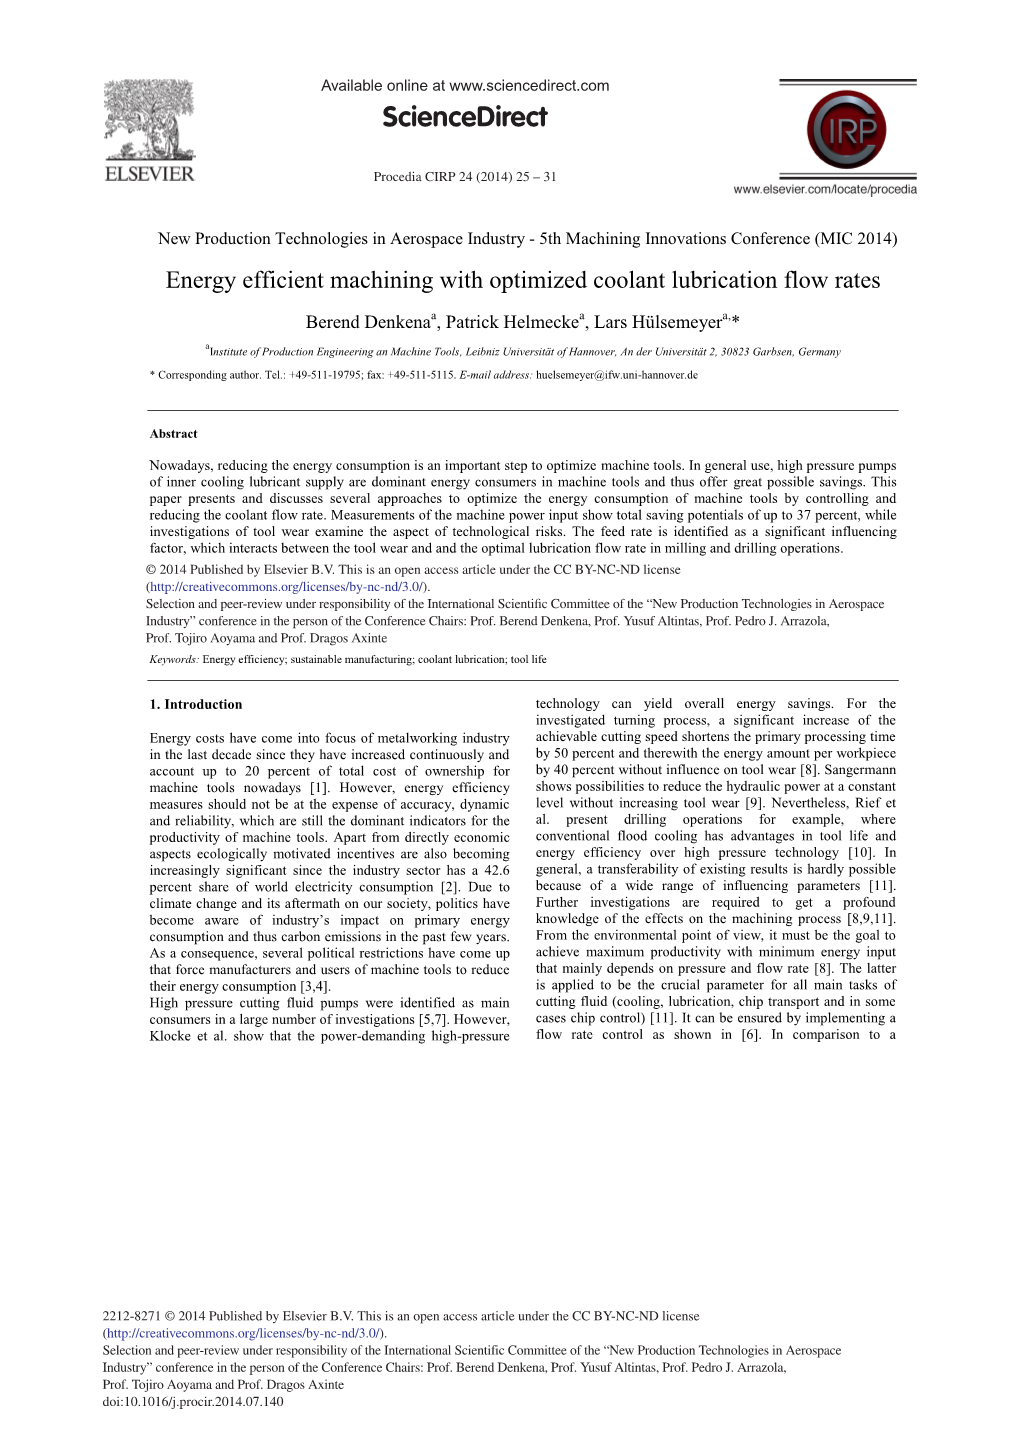 Energy Efficient Machining with Optimized Coolant Lubrication Flow Rates